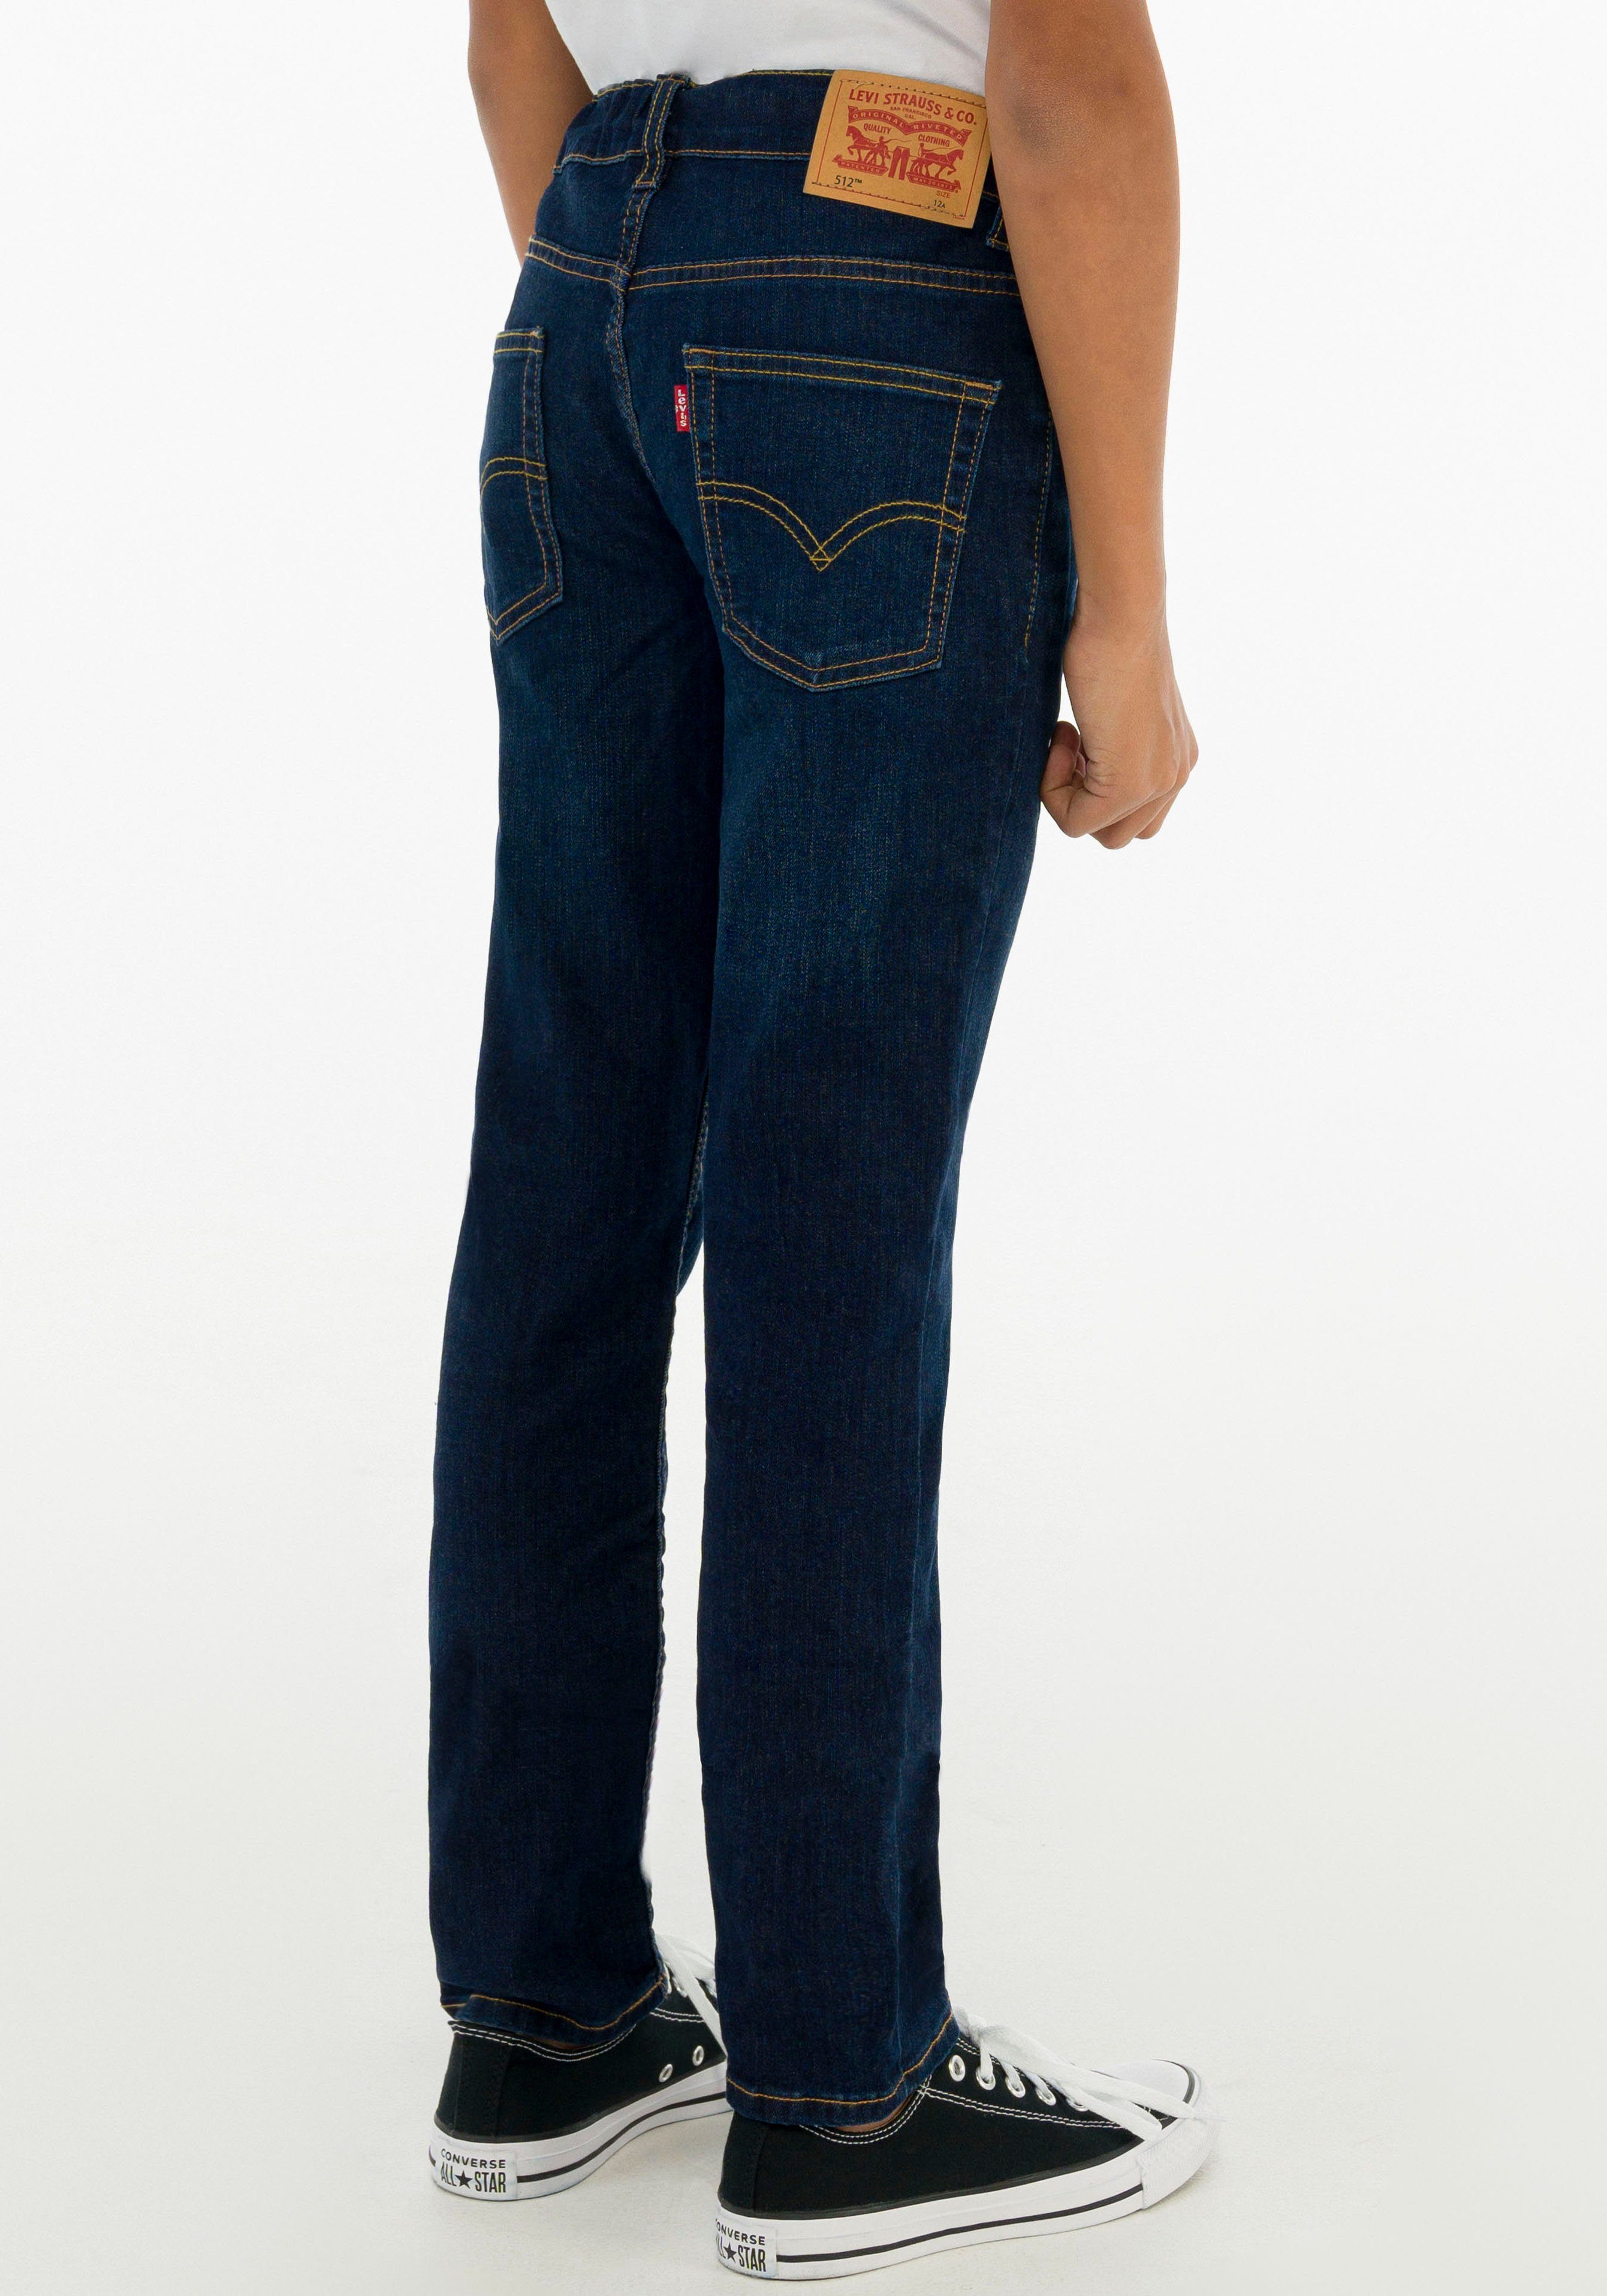 Kids PERFORMANCE Levi's® used 512 for blue BOYS Stretch-Jeans dark STRONG